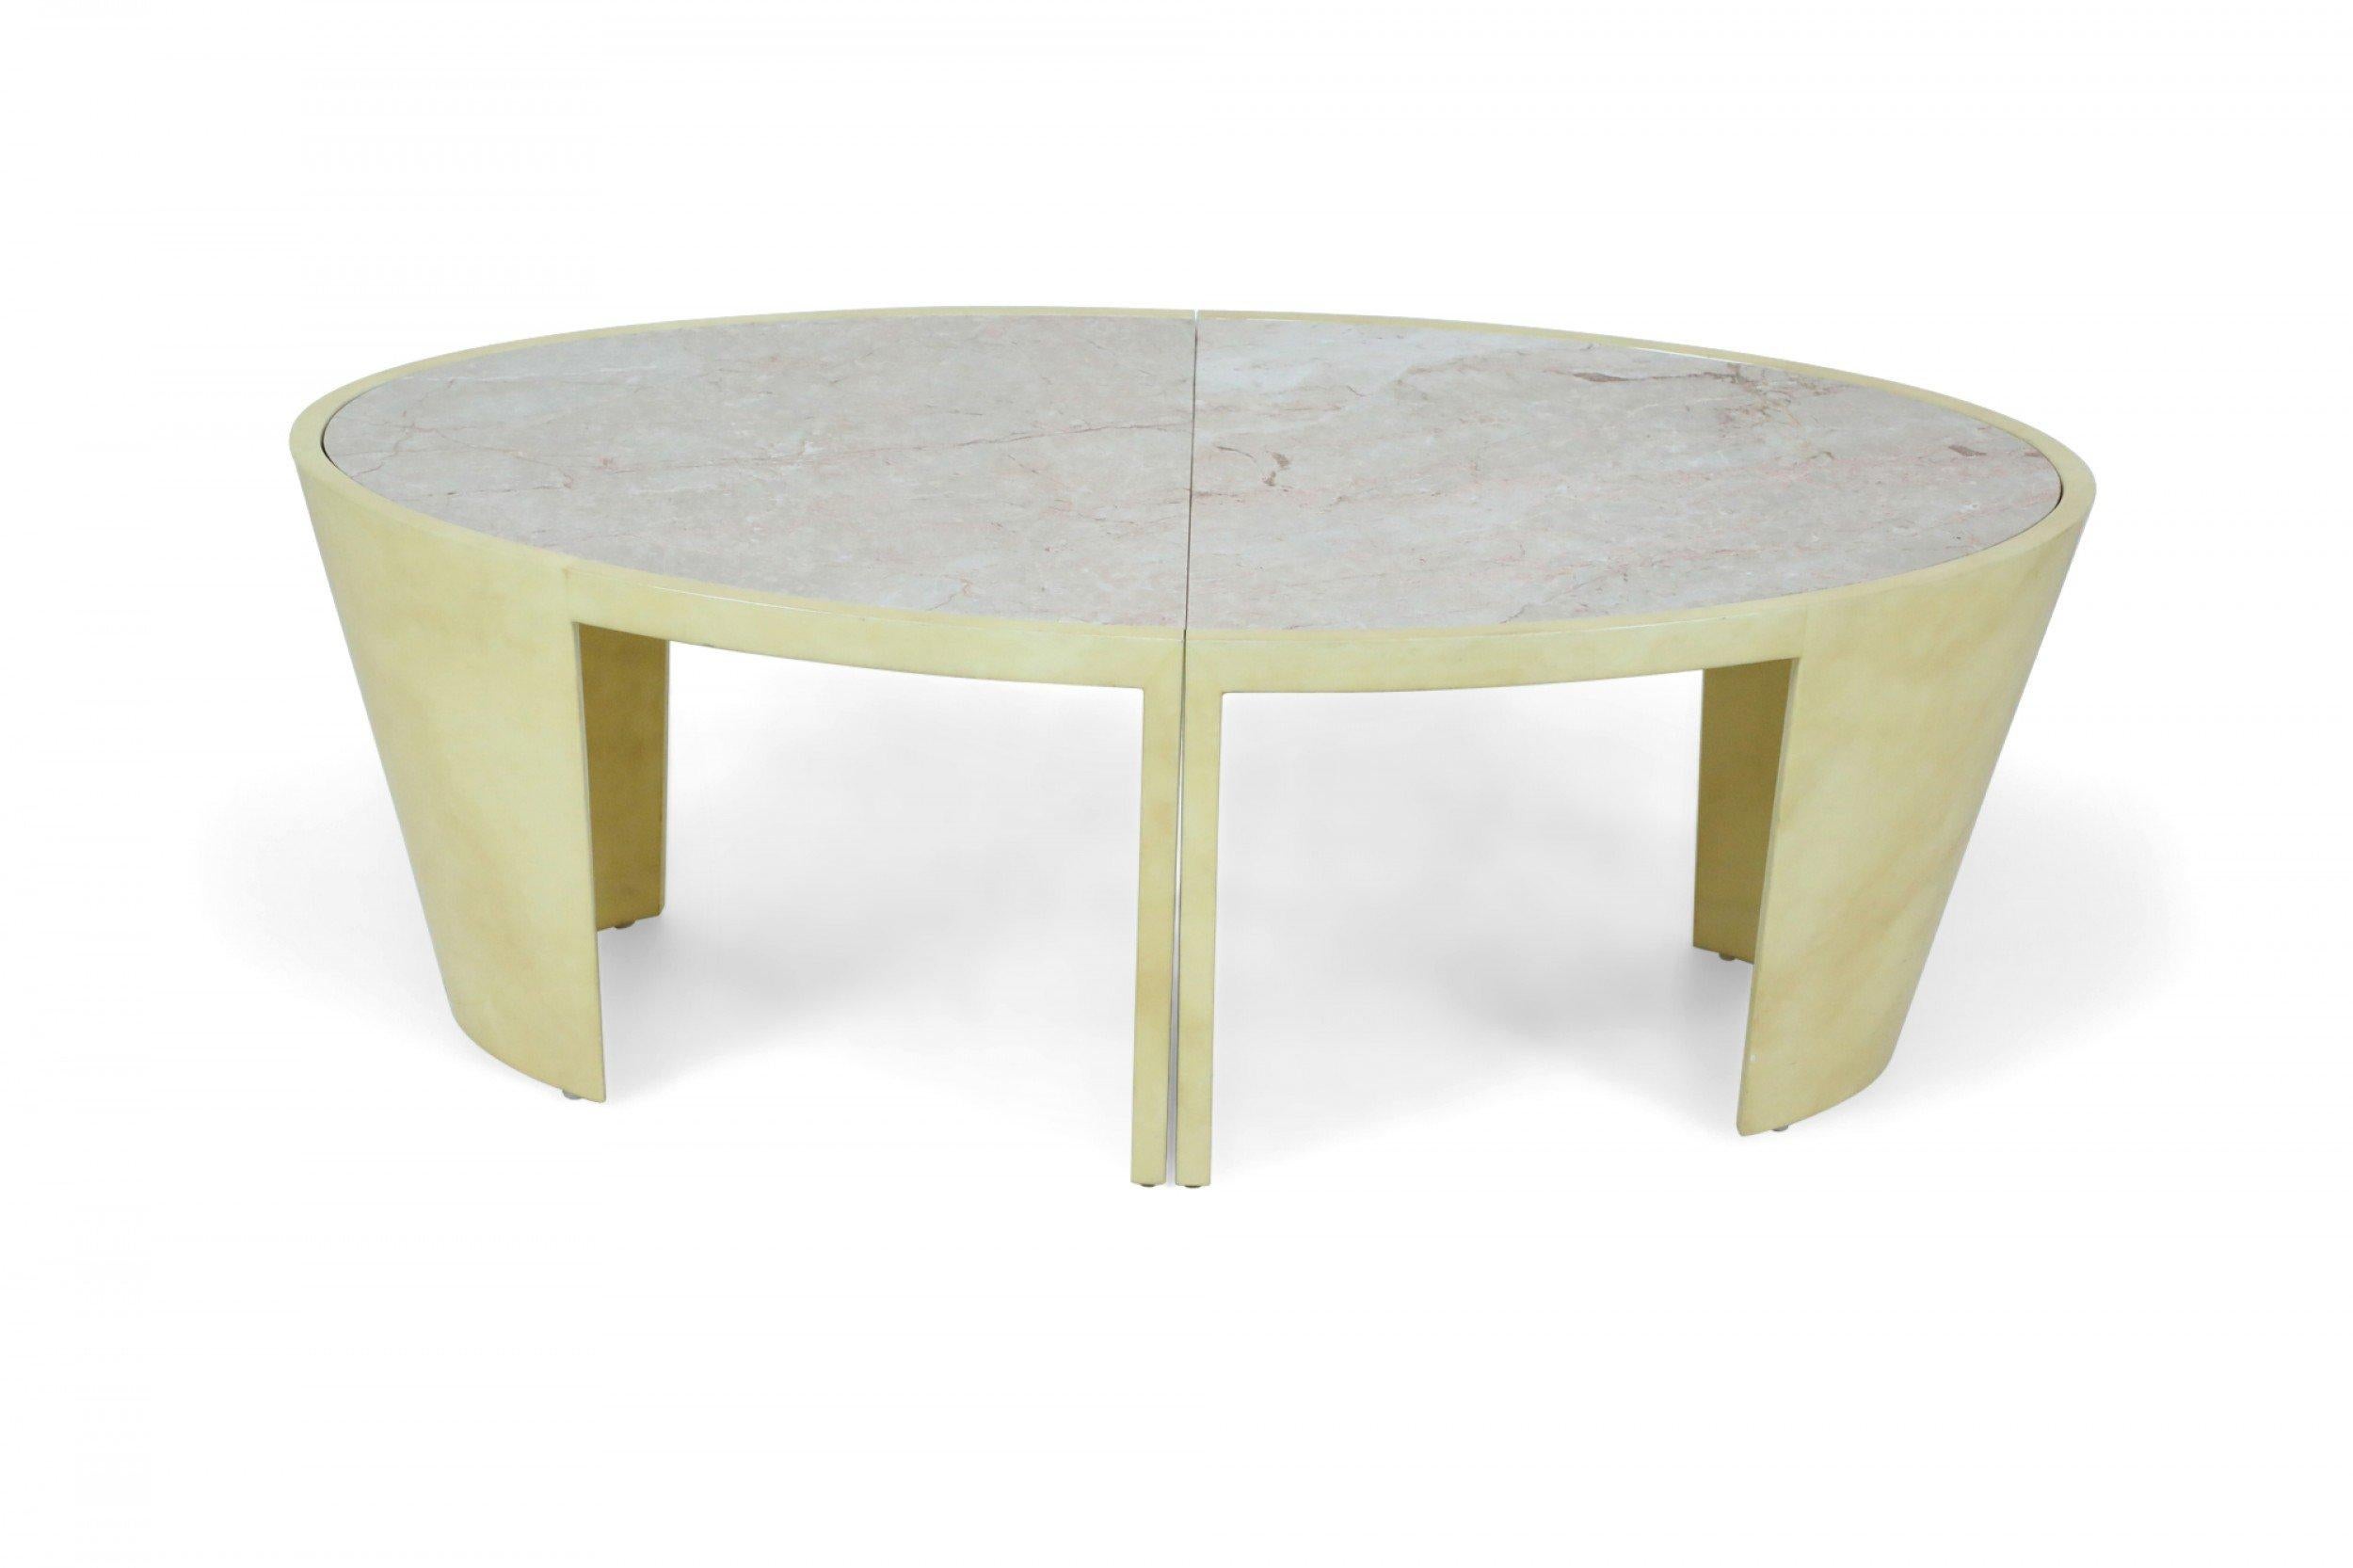 20th Century Italian Post-Modern Two-Piece Oval Parchment and Marble Coffee Table For Sale